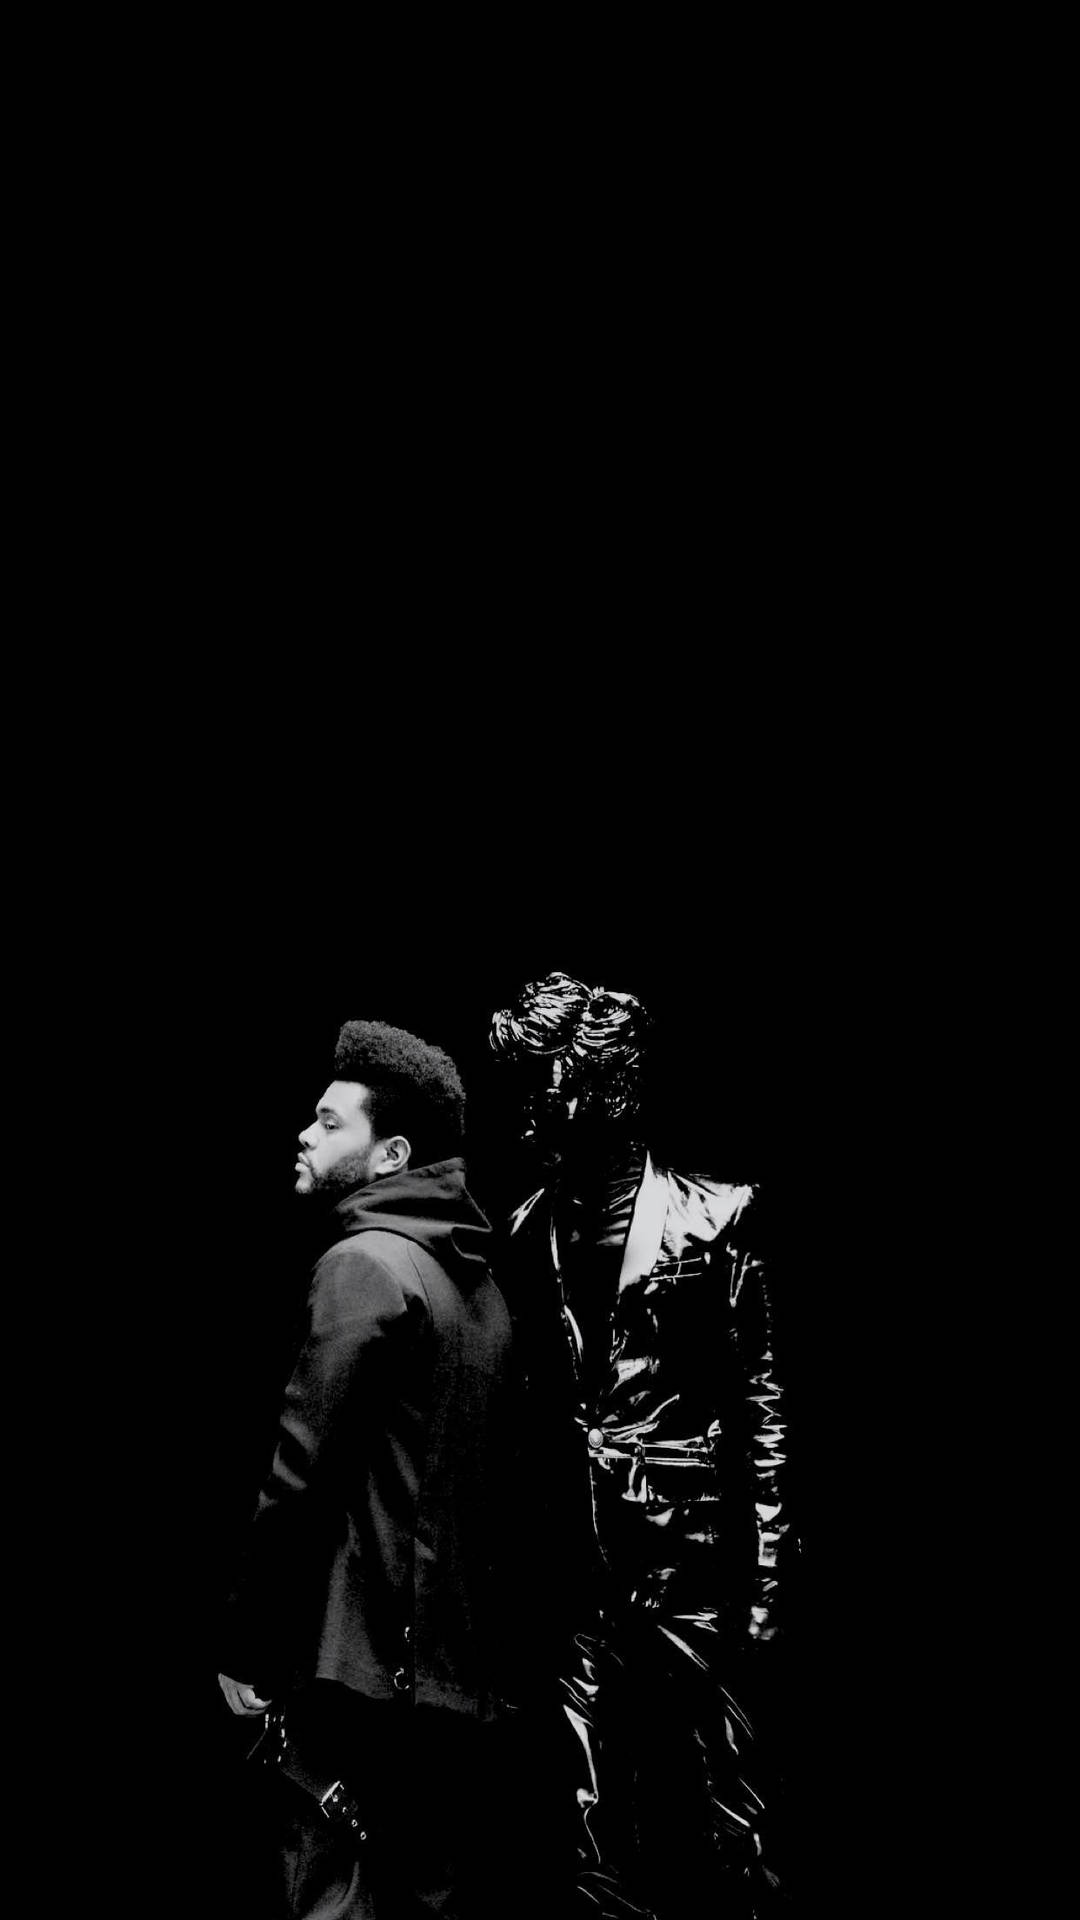 Free The Weeknd Wallpaper Downloads, [100+] The Weeknd Wallpapers for FREE  